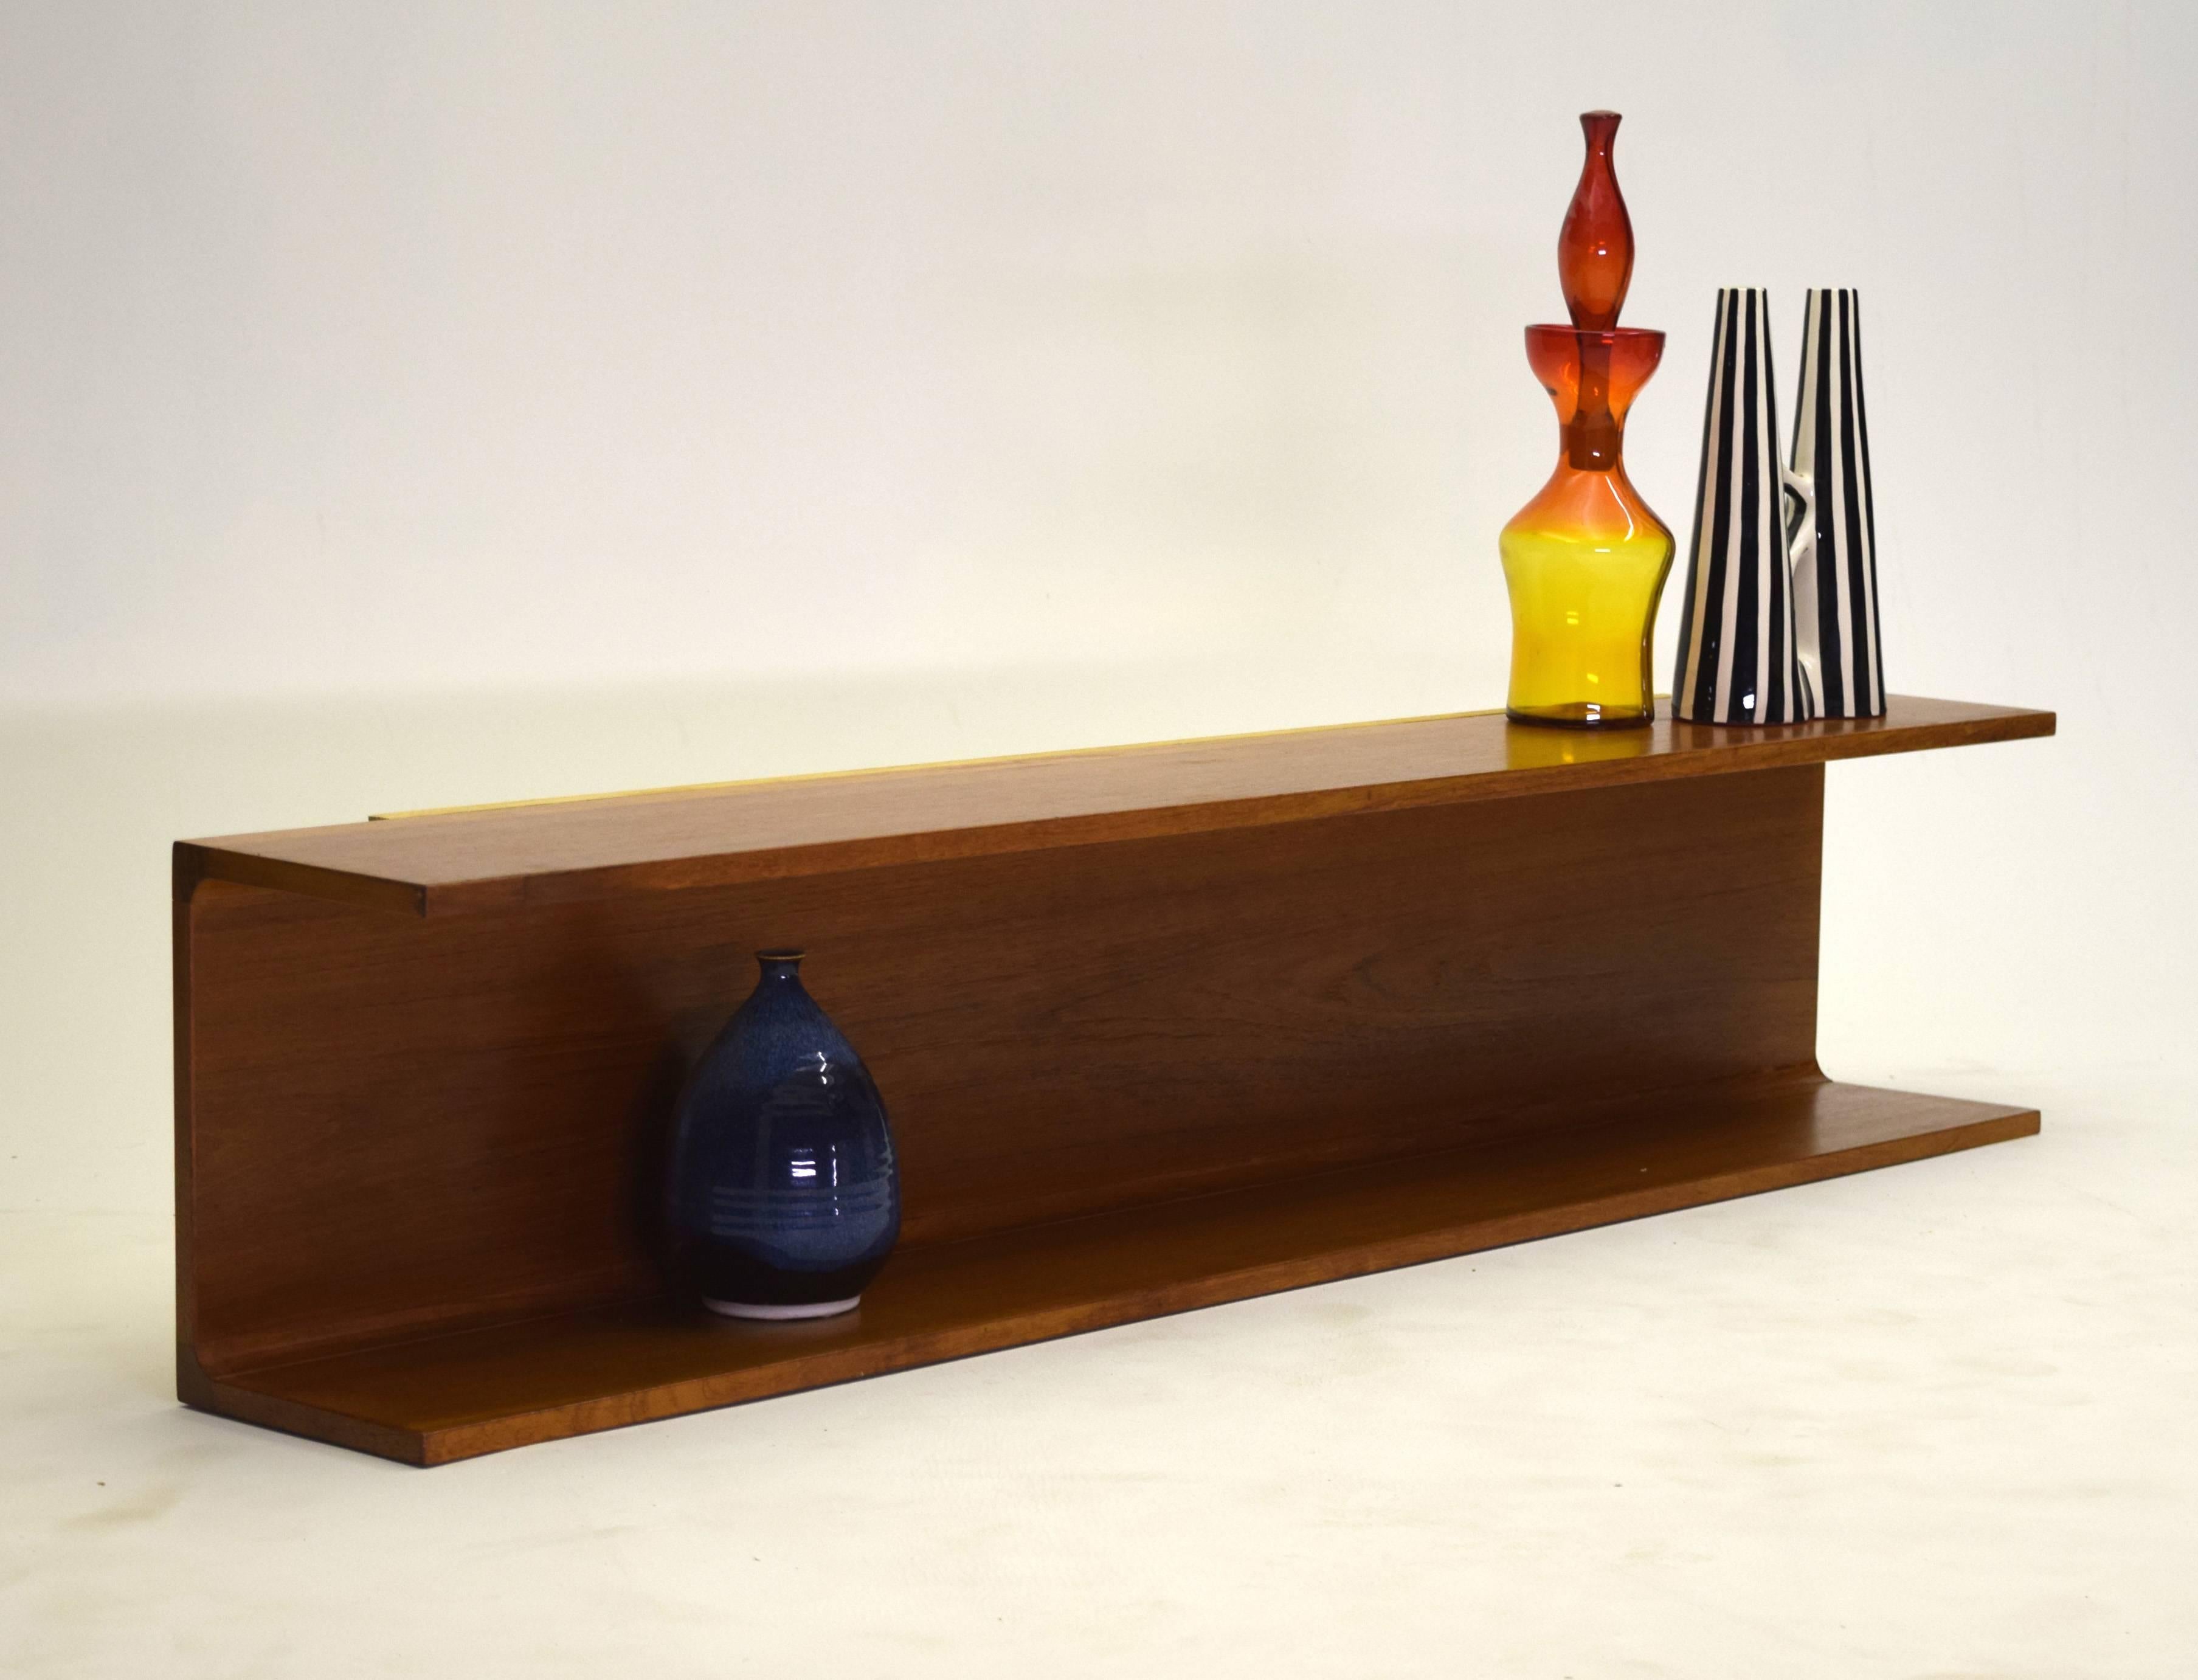 This signed shelf is produced from teak and measures 55